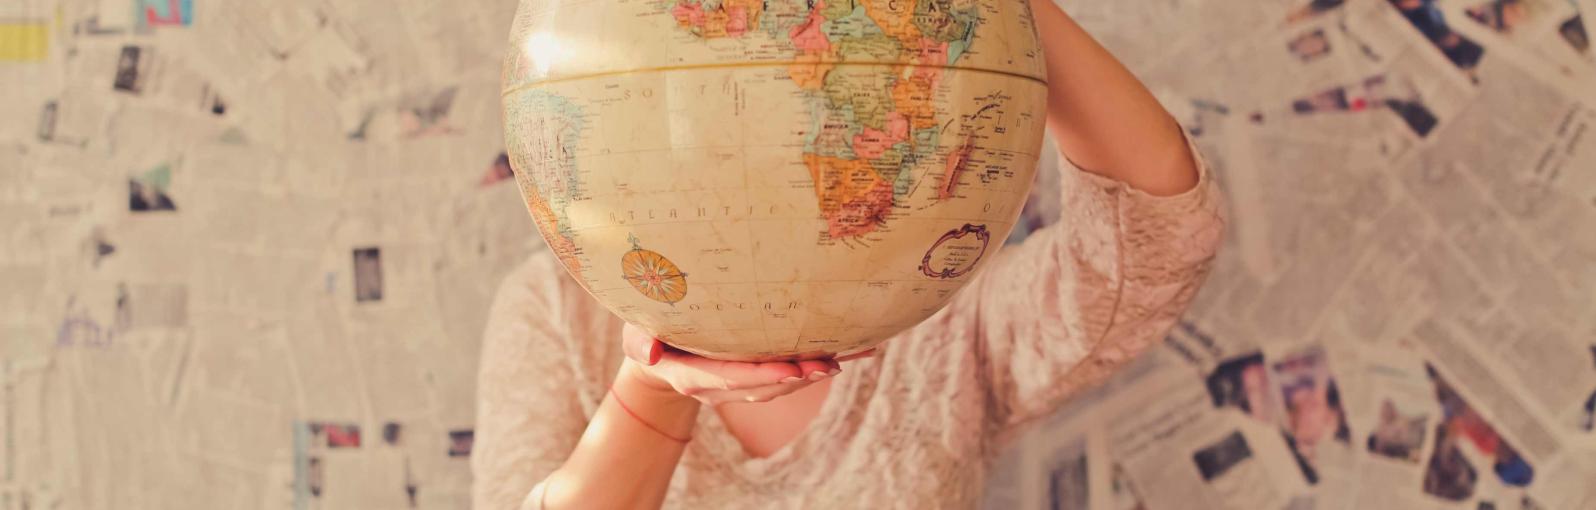 A person holding a globe